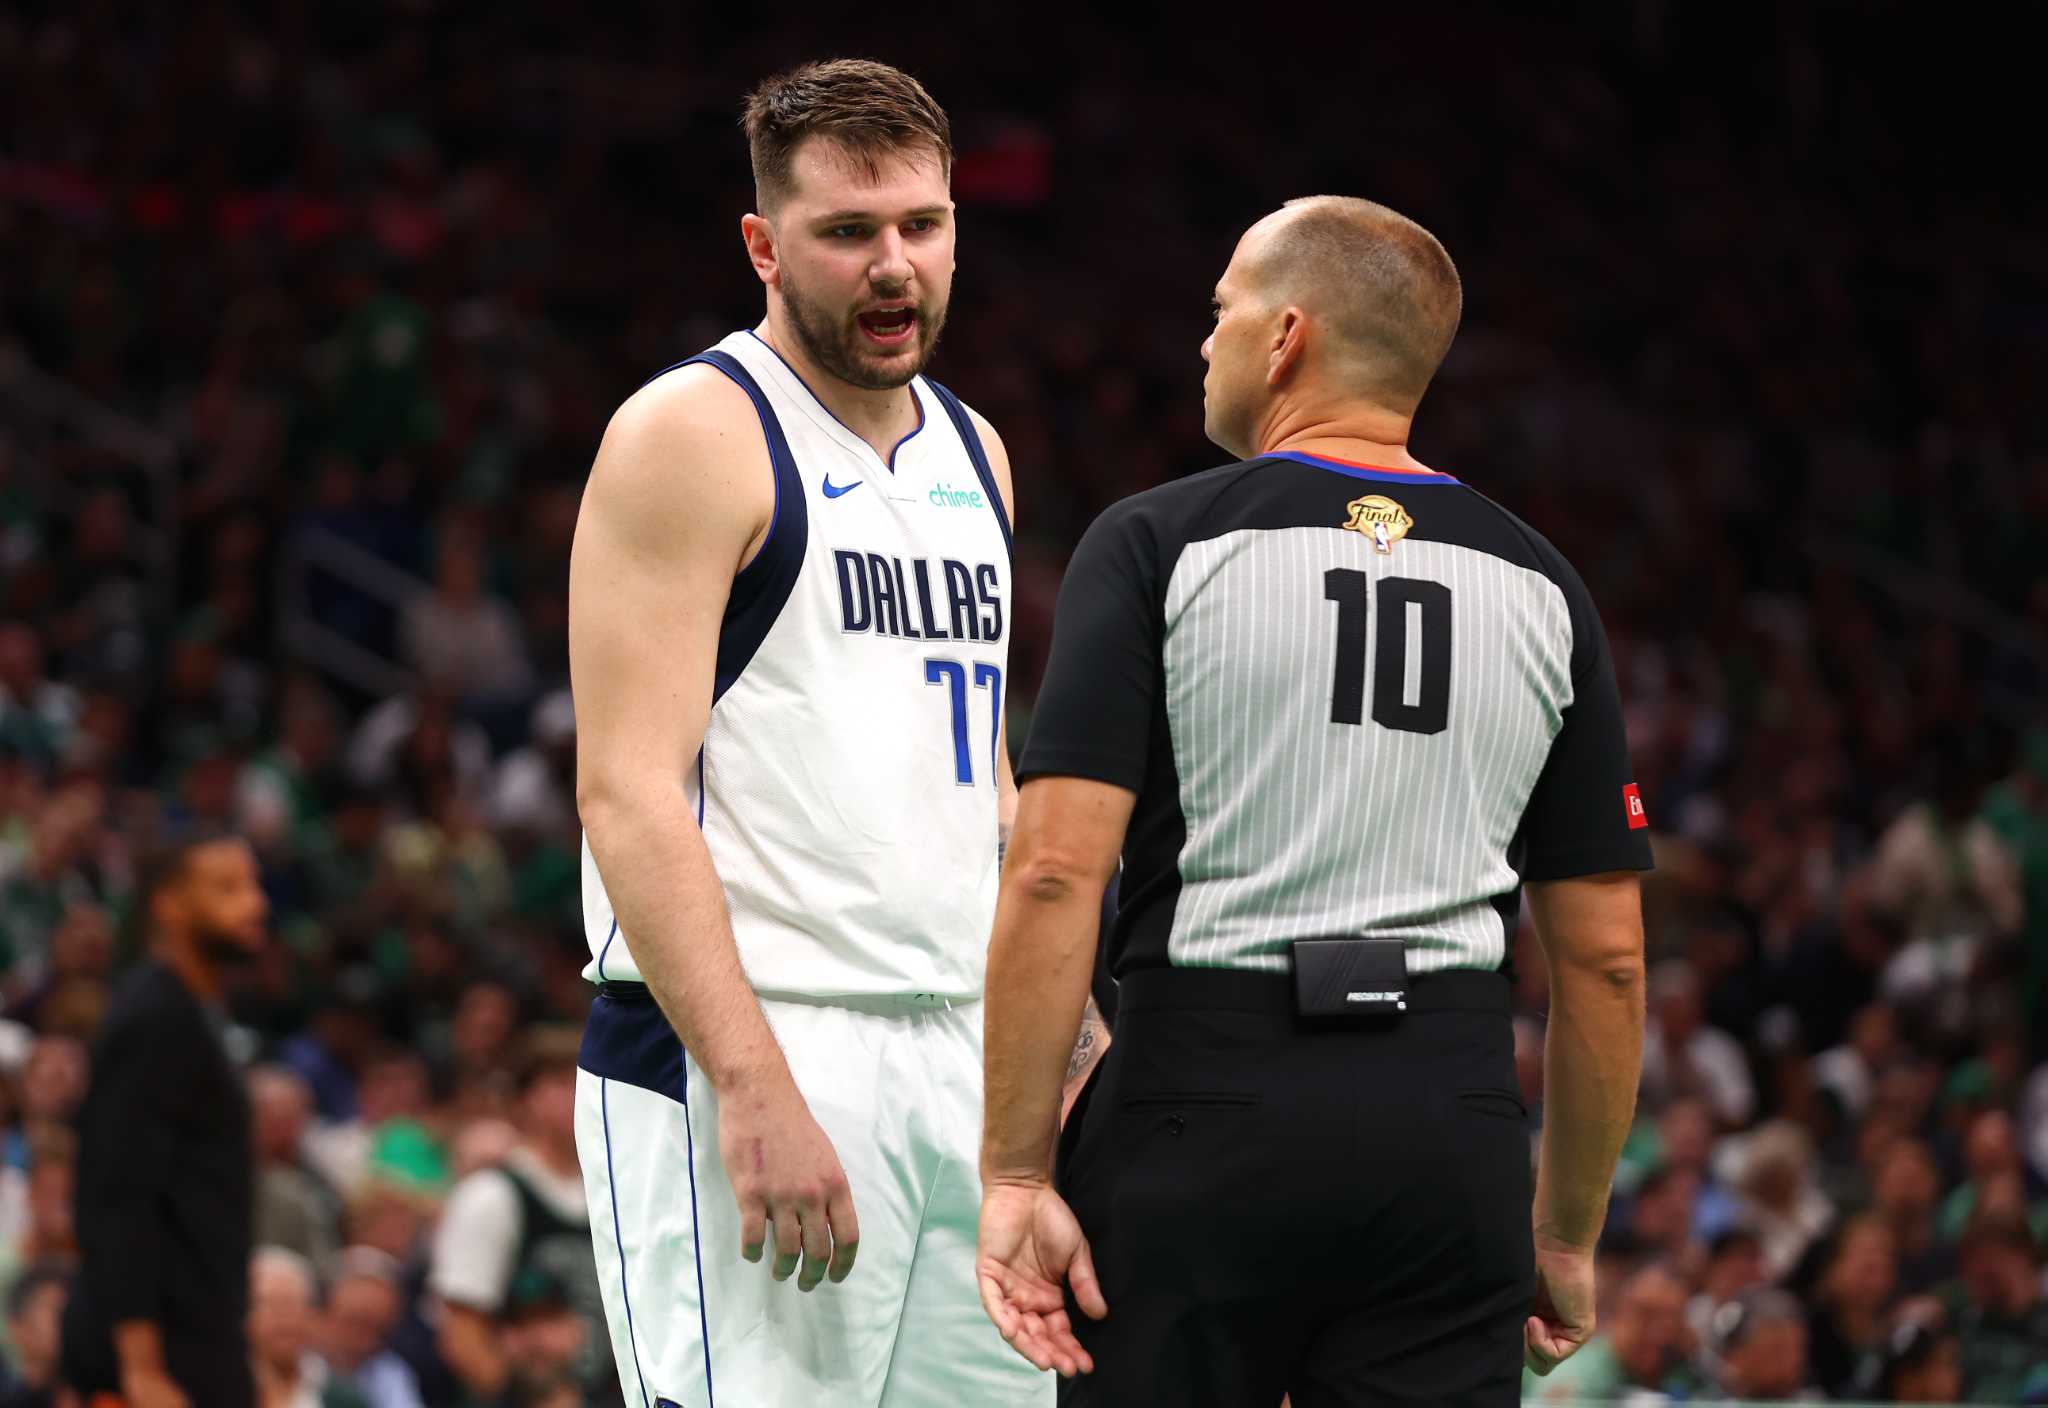 Can Luka Doncic stop complaining and let us enjoy his game in the NBA Finals?